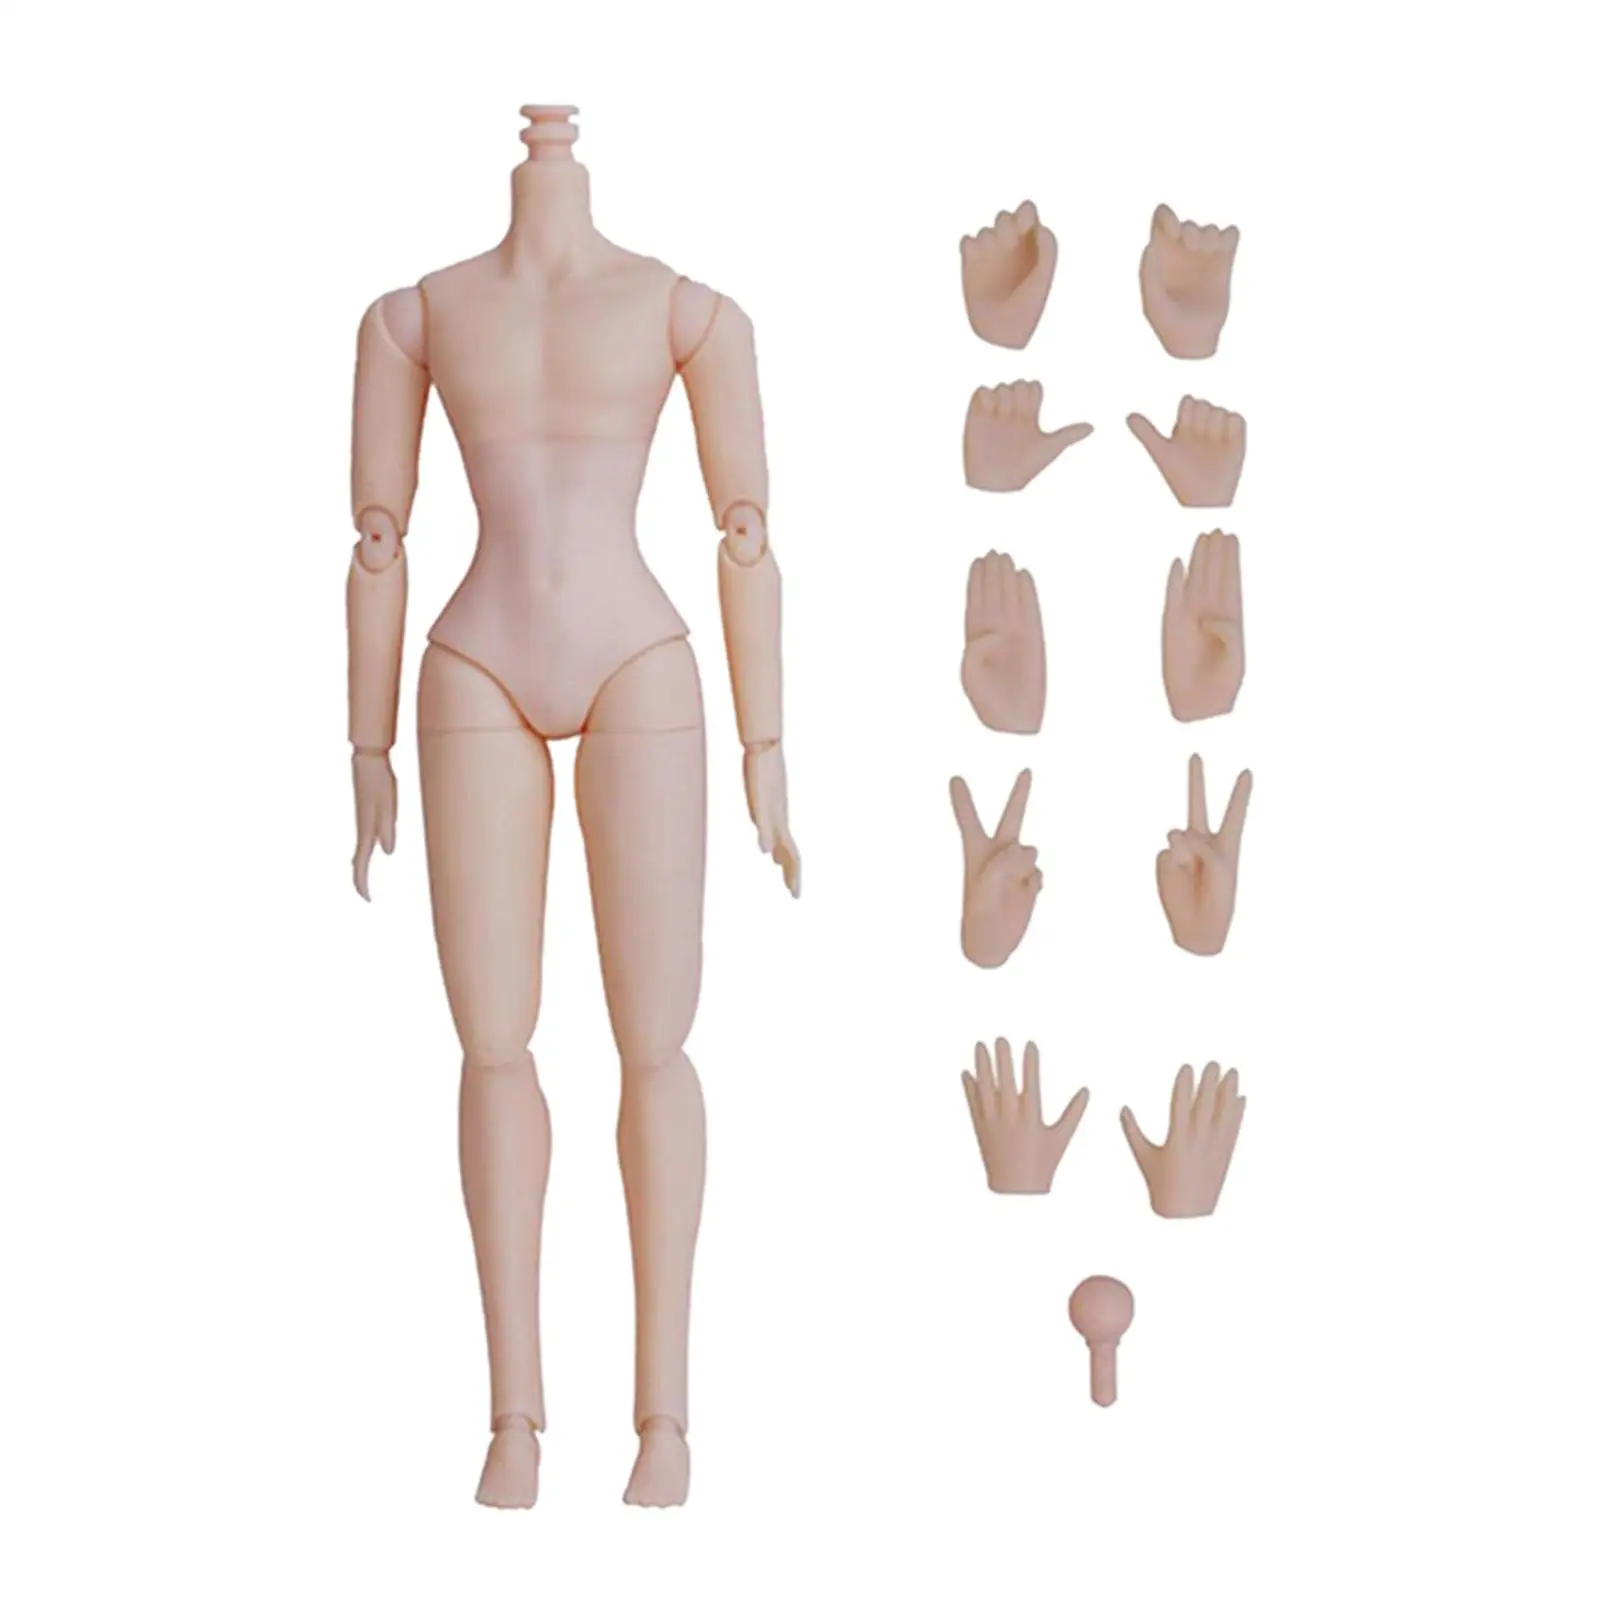 12 inch Jointed Doll Body Narrow Shoulder Without Head Toys Detachable DIY Miniature Collectible Flexible Realistic